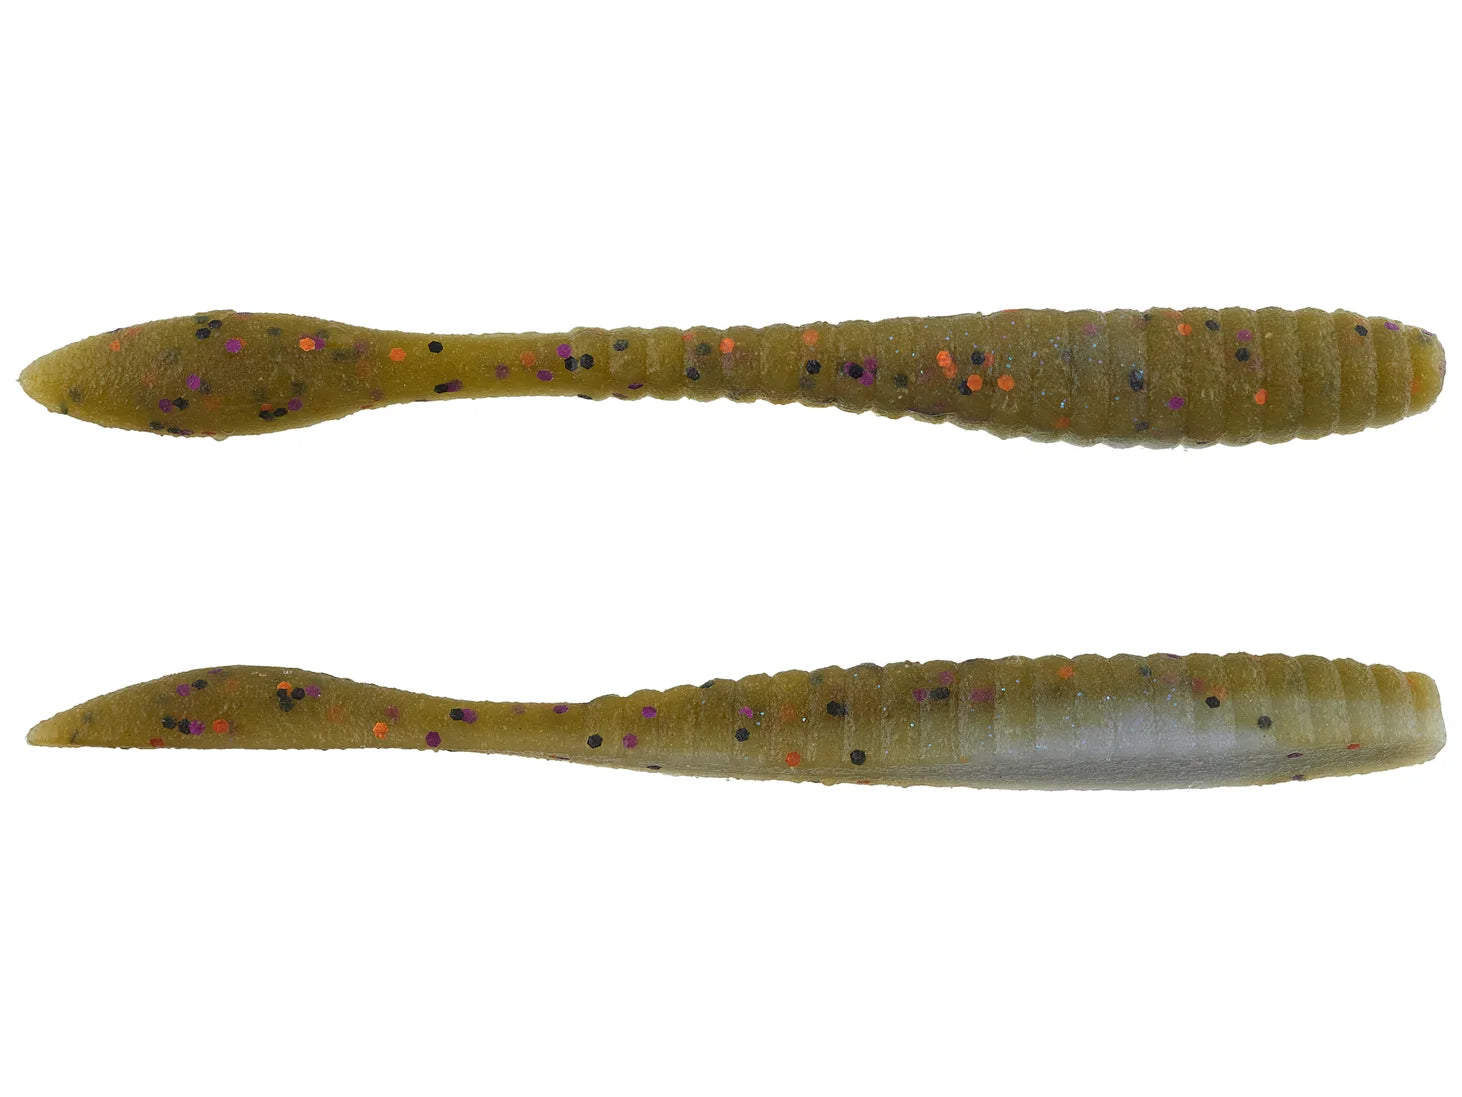 Buy Soft Plastic Worms Online, Bass Fishing Accessories, Soft Plastics  color-gobyashi